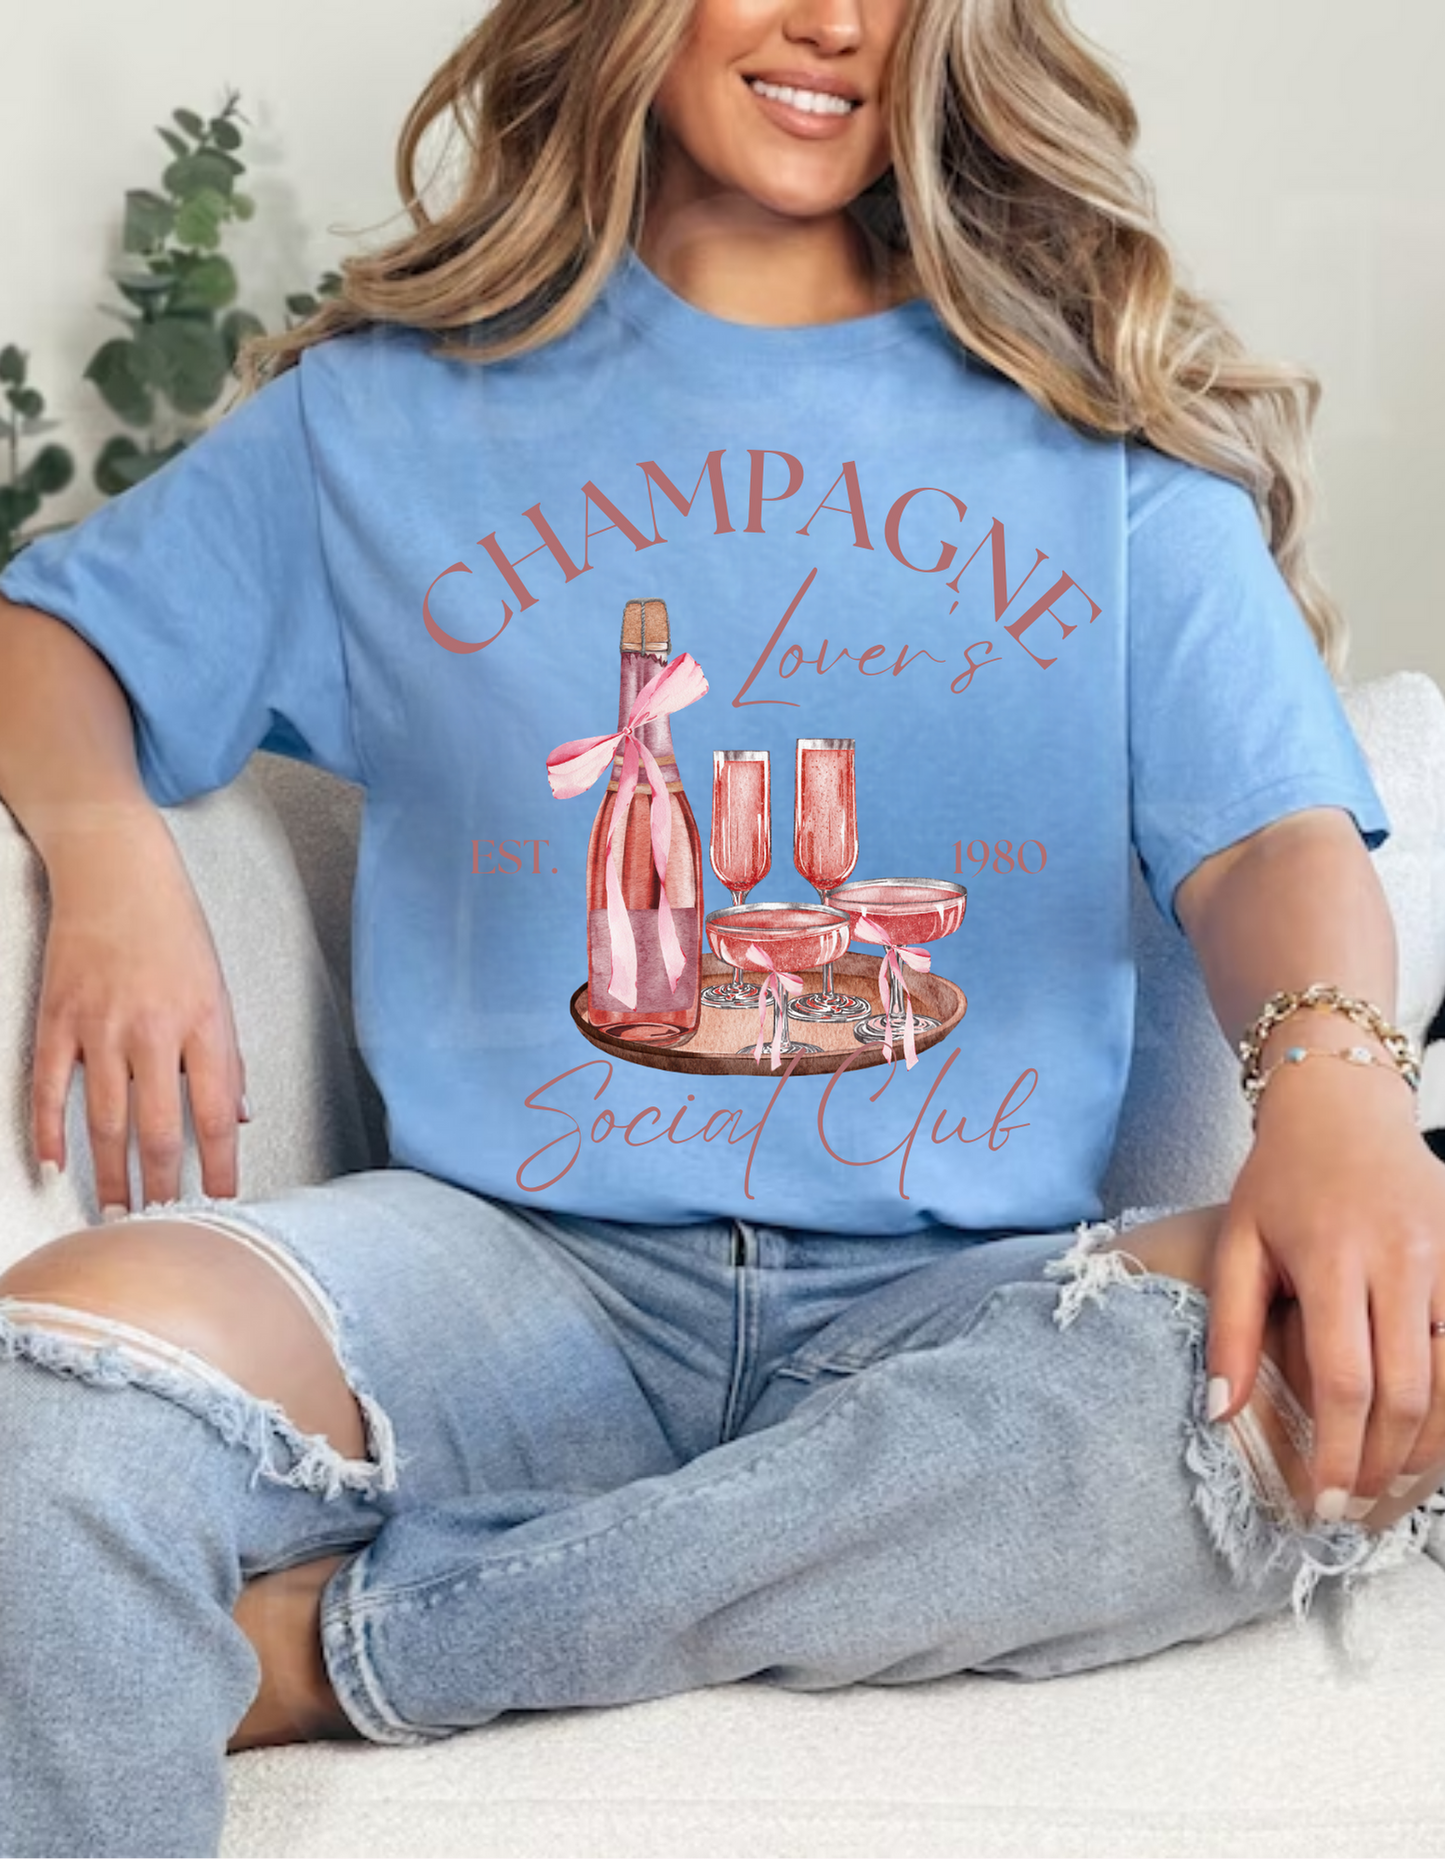 Champagne Lover's Social Club Adult Tees